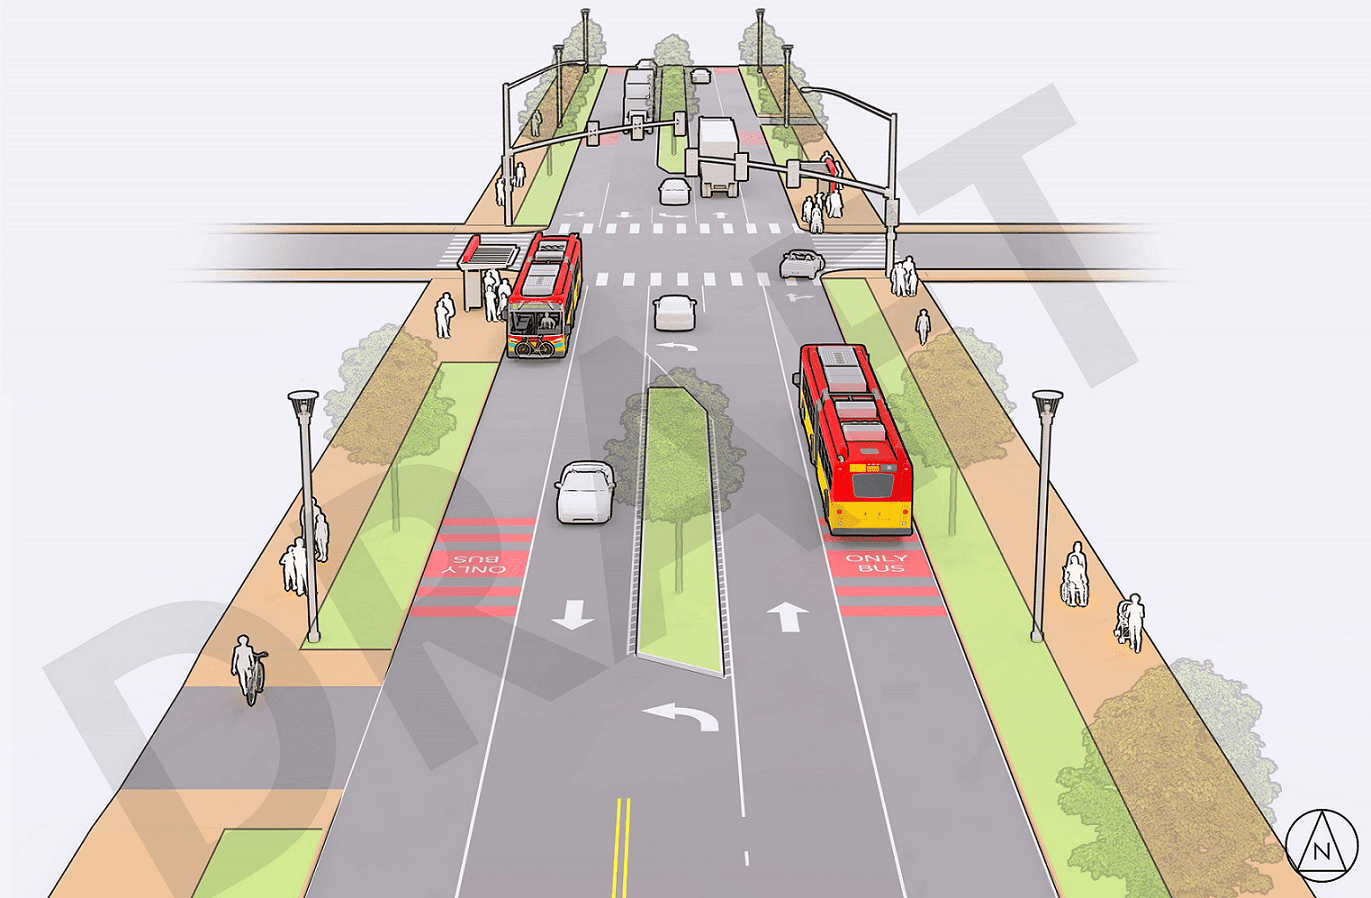 An artist's drawing of a street with buses, people walking and biking, and cars. The street includes multiple lanes and green buffer areas.